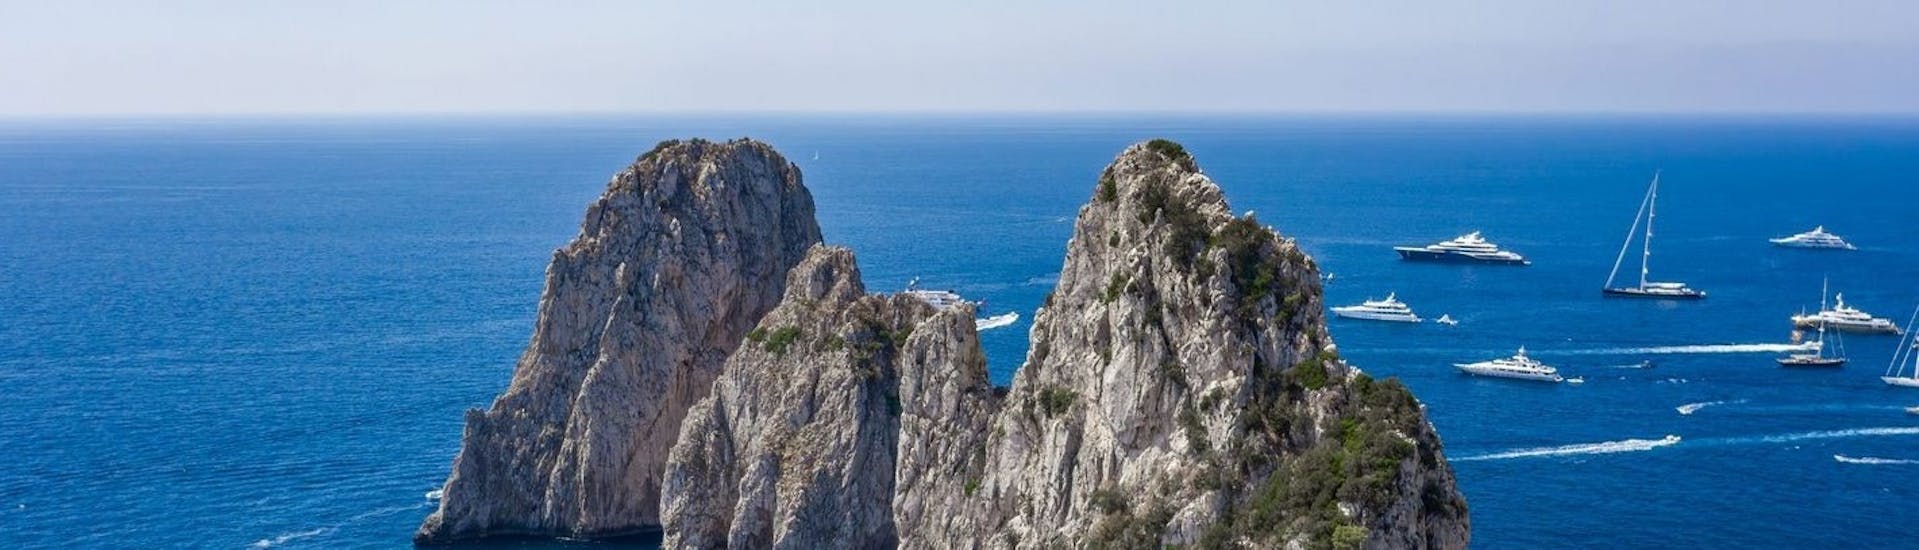 View of the Faraglioni di Capri you can admire during the Boat Trip from Capri around the island and to the Blue Grotto.